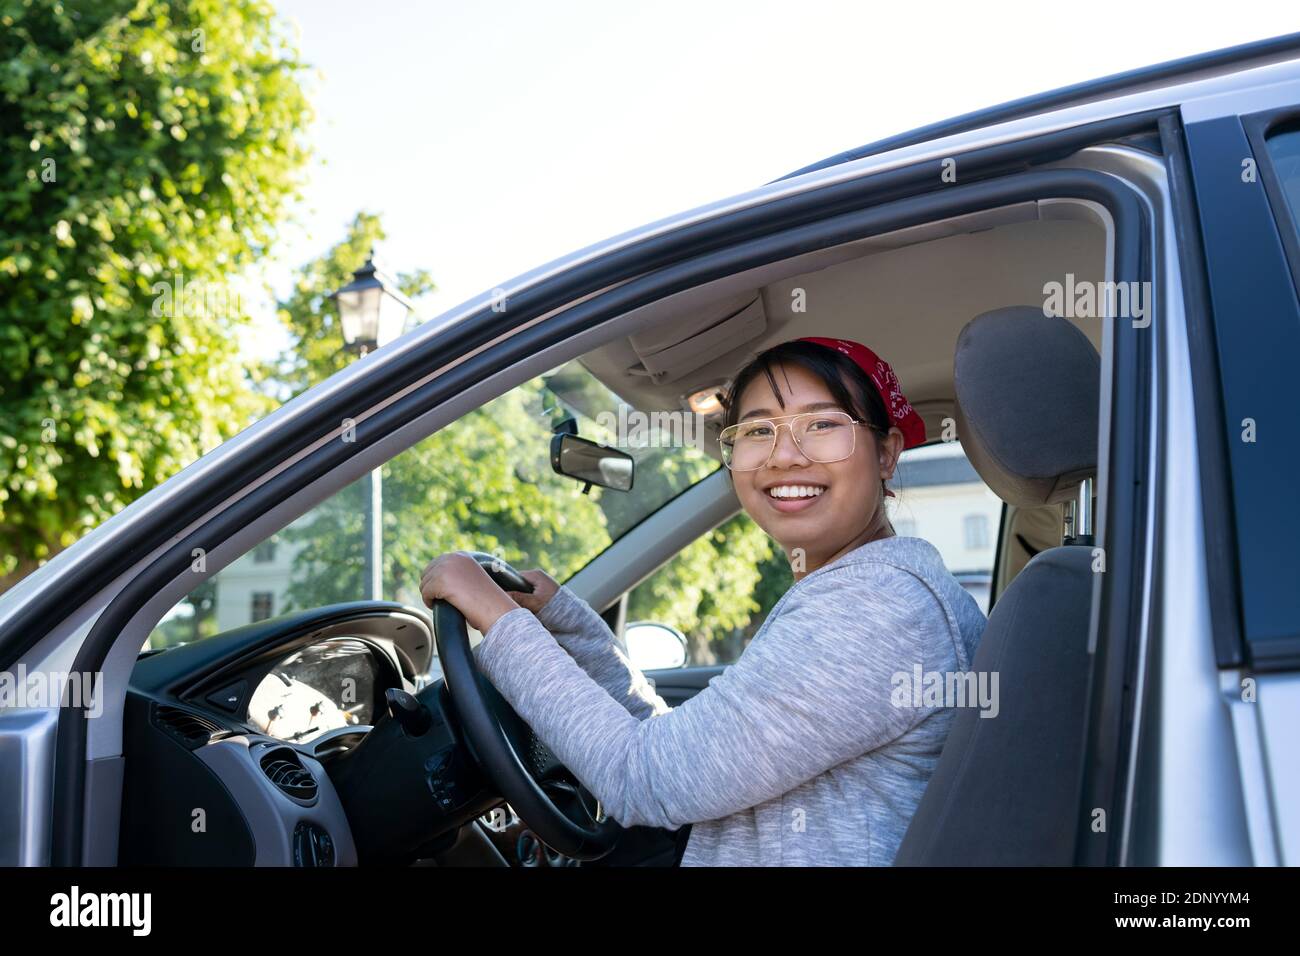 Smiling woman sitting in car Stock Photo